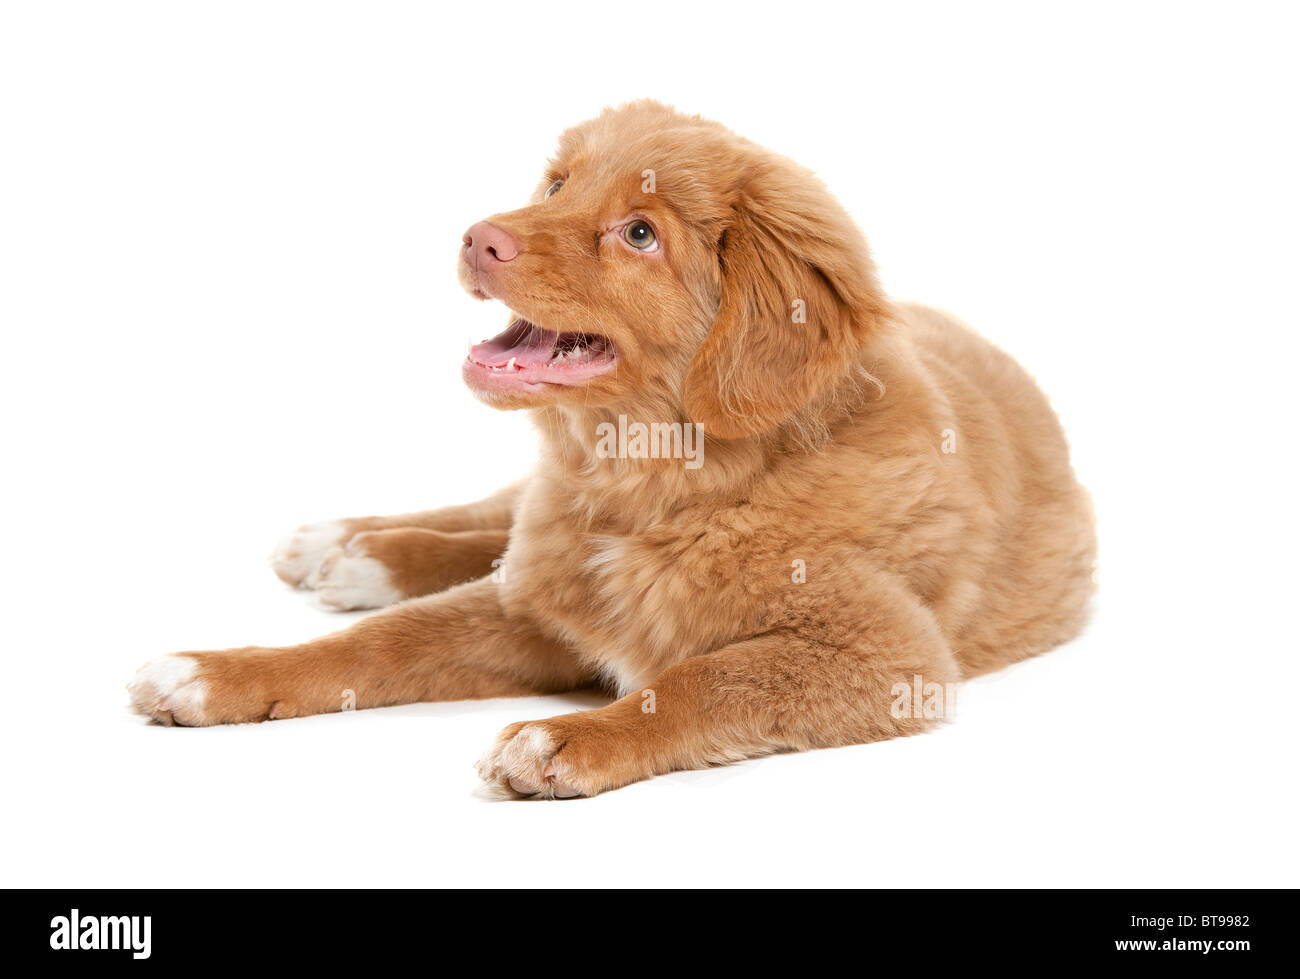 a young puppy of the Nova Scotia Duck Tolling Retriever breed Stock Photo